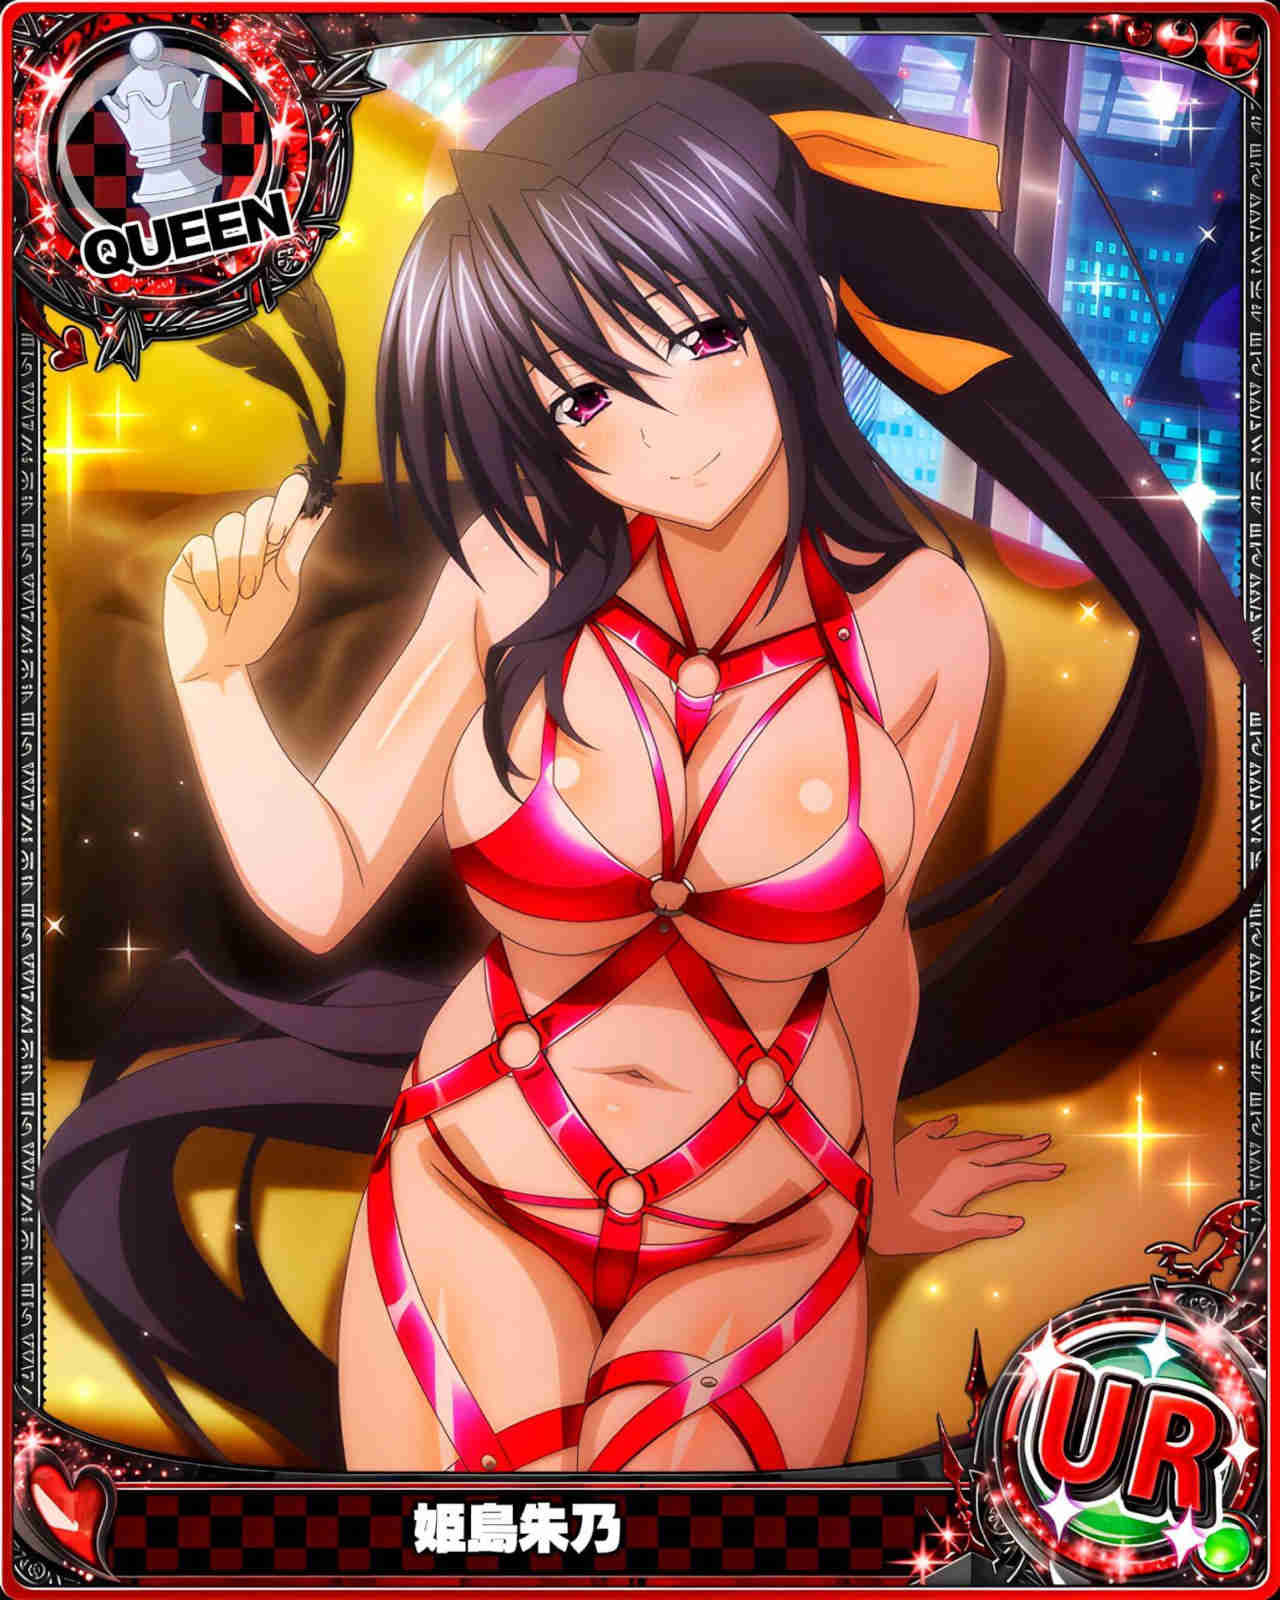 High School DxD: A new event shows us the girls in a sexier way 